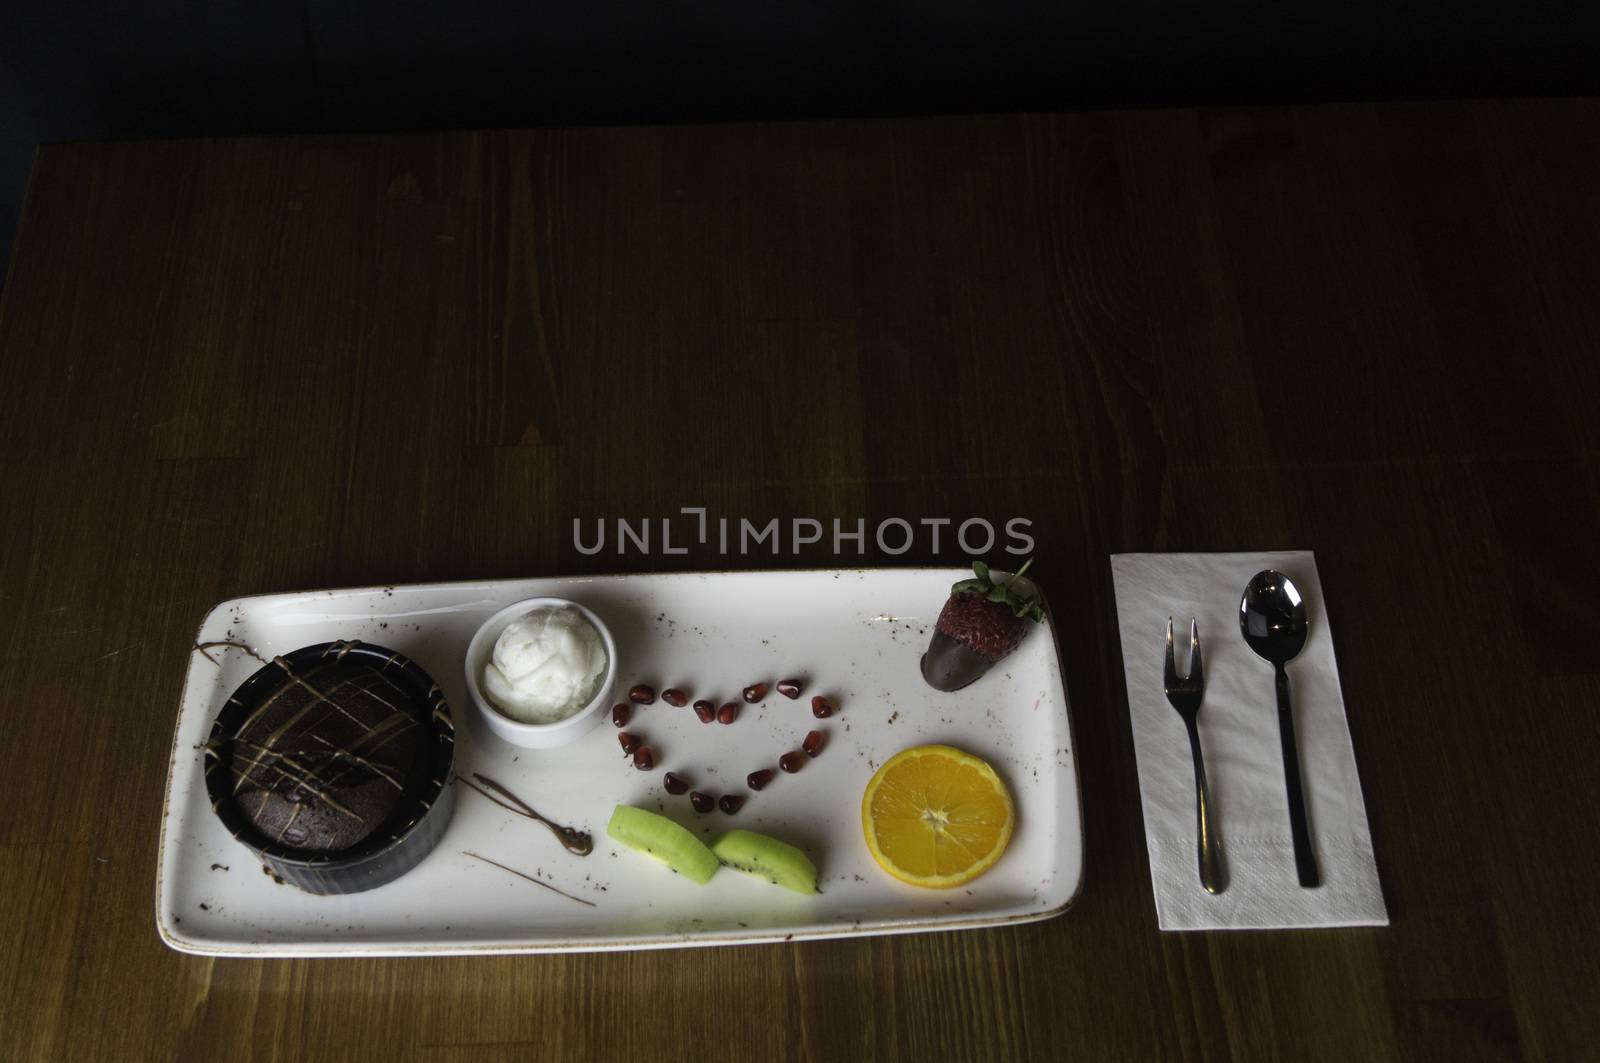 In carefully crafted serving tray cake and sweets